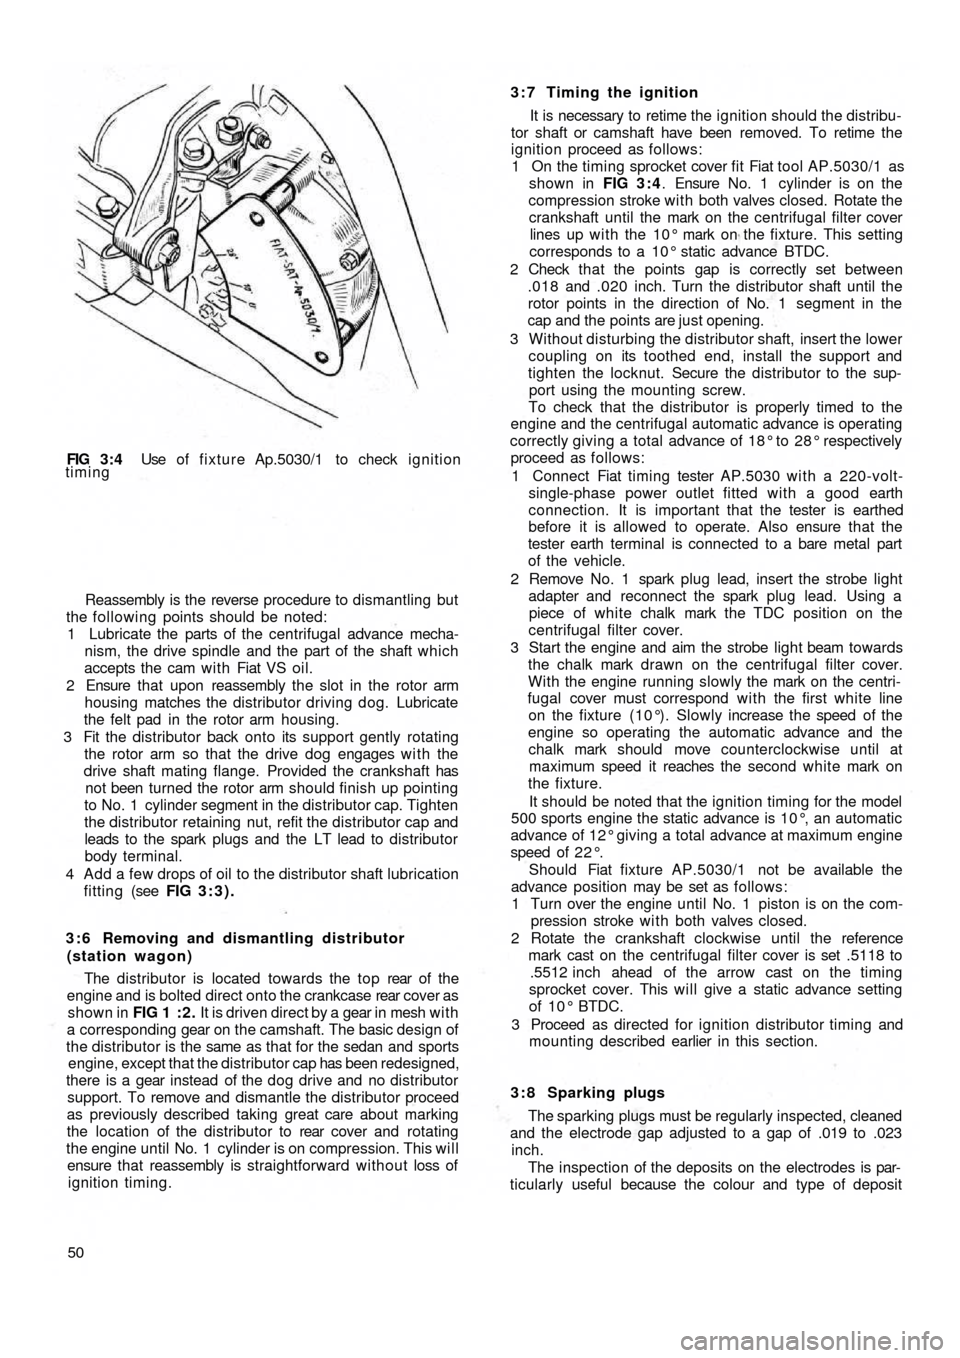 FIAT 500 1959 1.G Workshop Manual FIG  3 : 4  Use of fixture Ap.5030/1 to check ignition
timing
Reassembly is the reverse procedure to dismantling but
the following points should be noted:
1 Lubricate the parts of the centrifugal adva